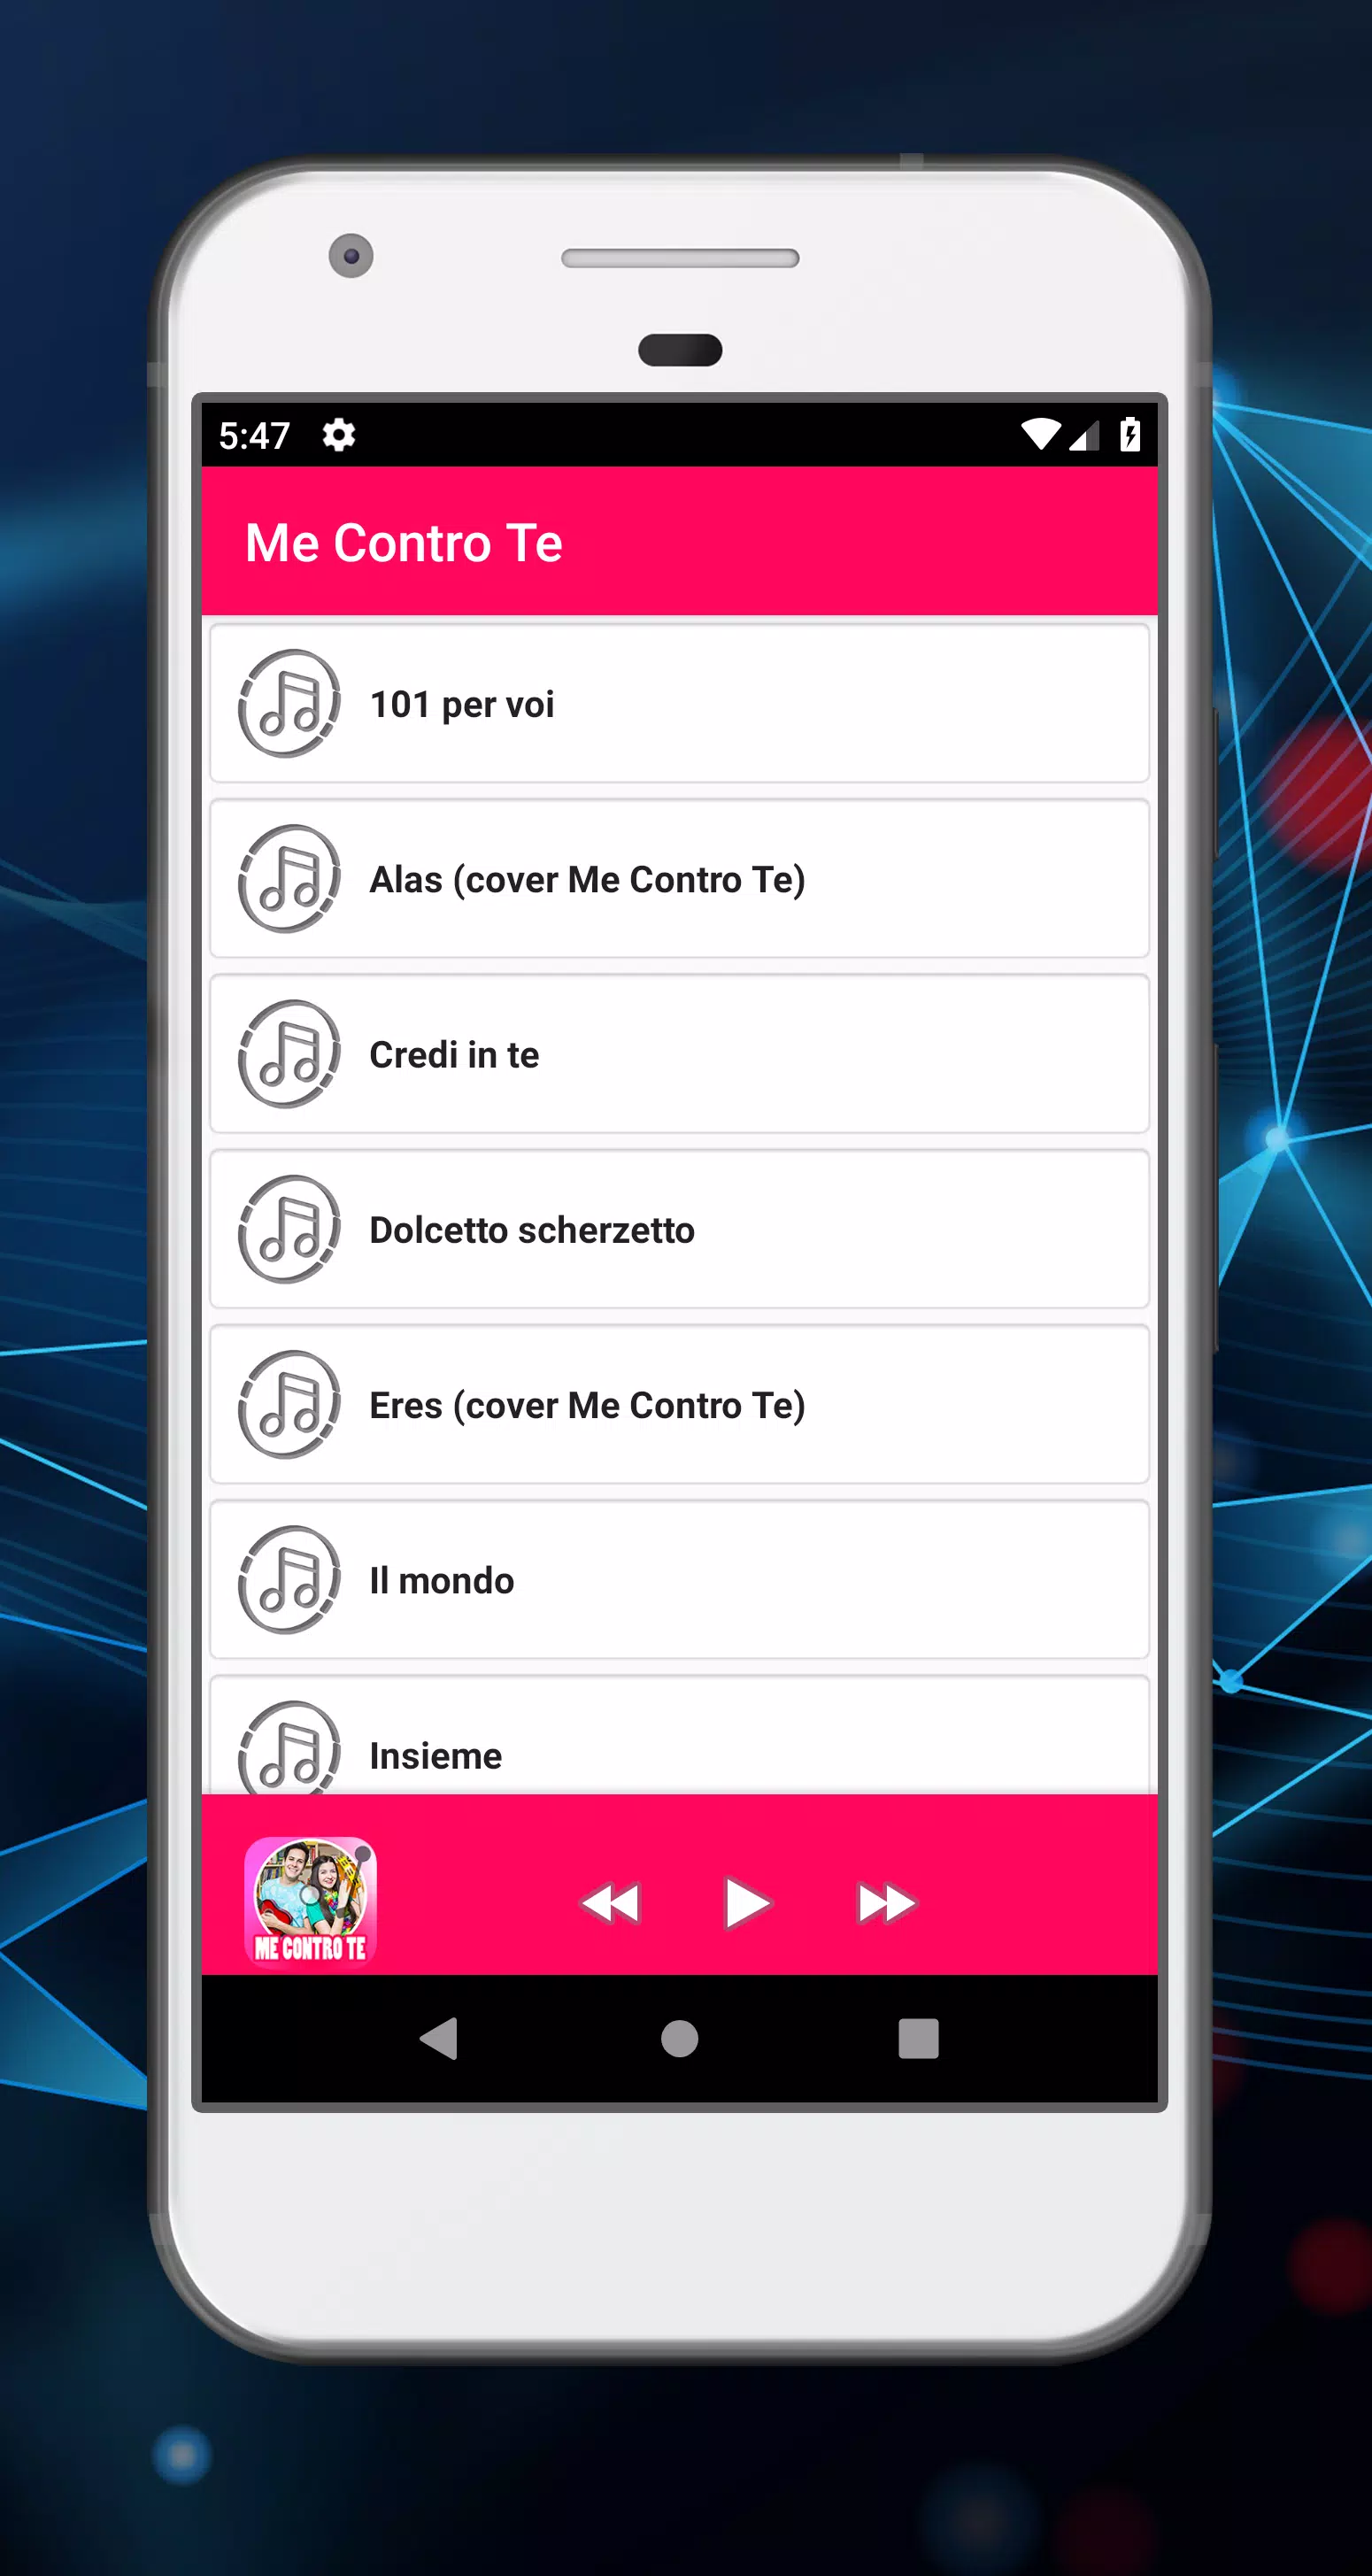 Me Contro Te musica + letras 2020 APK for Android Download